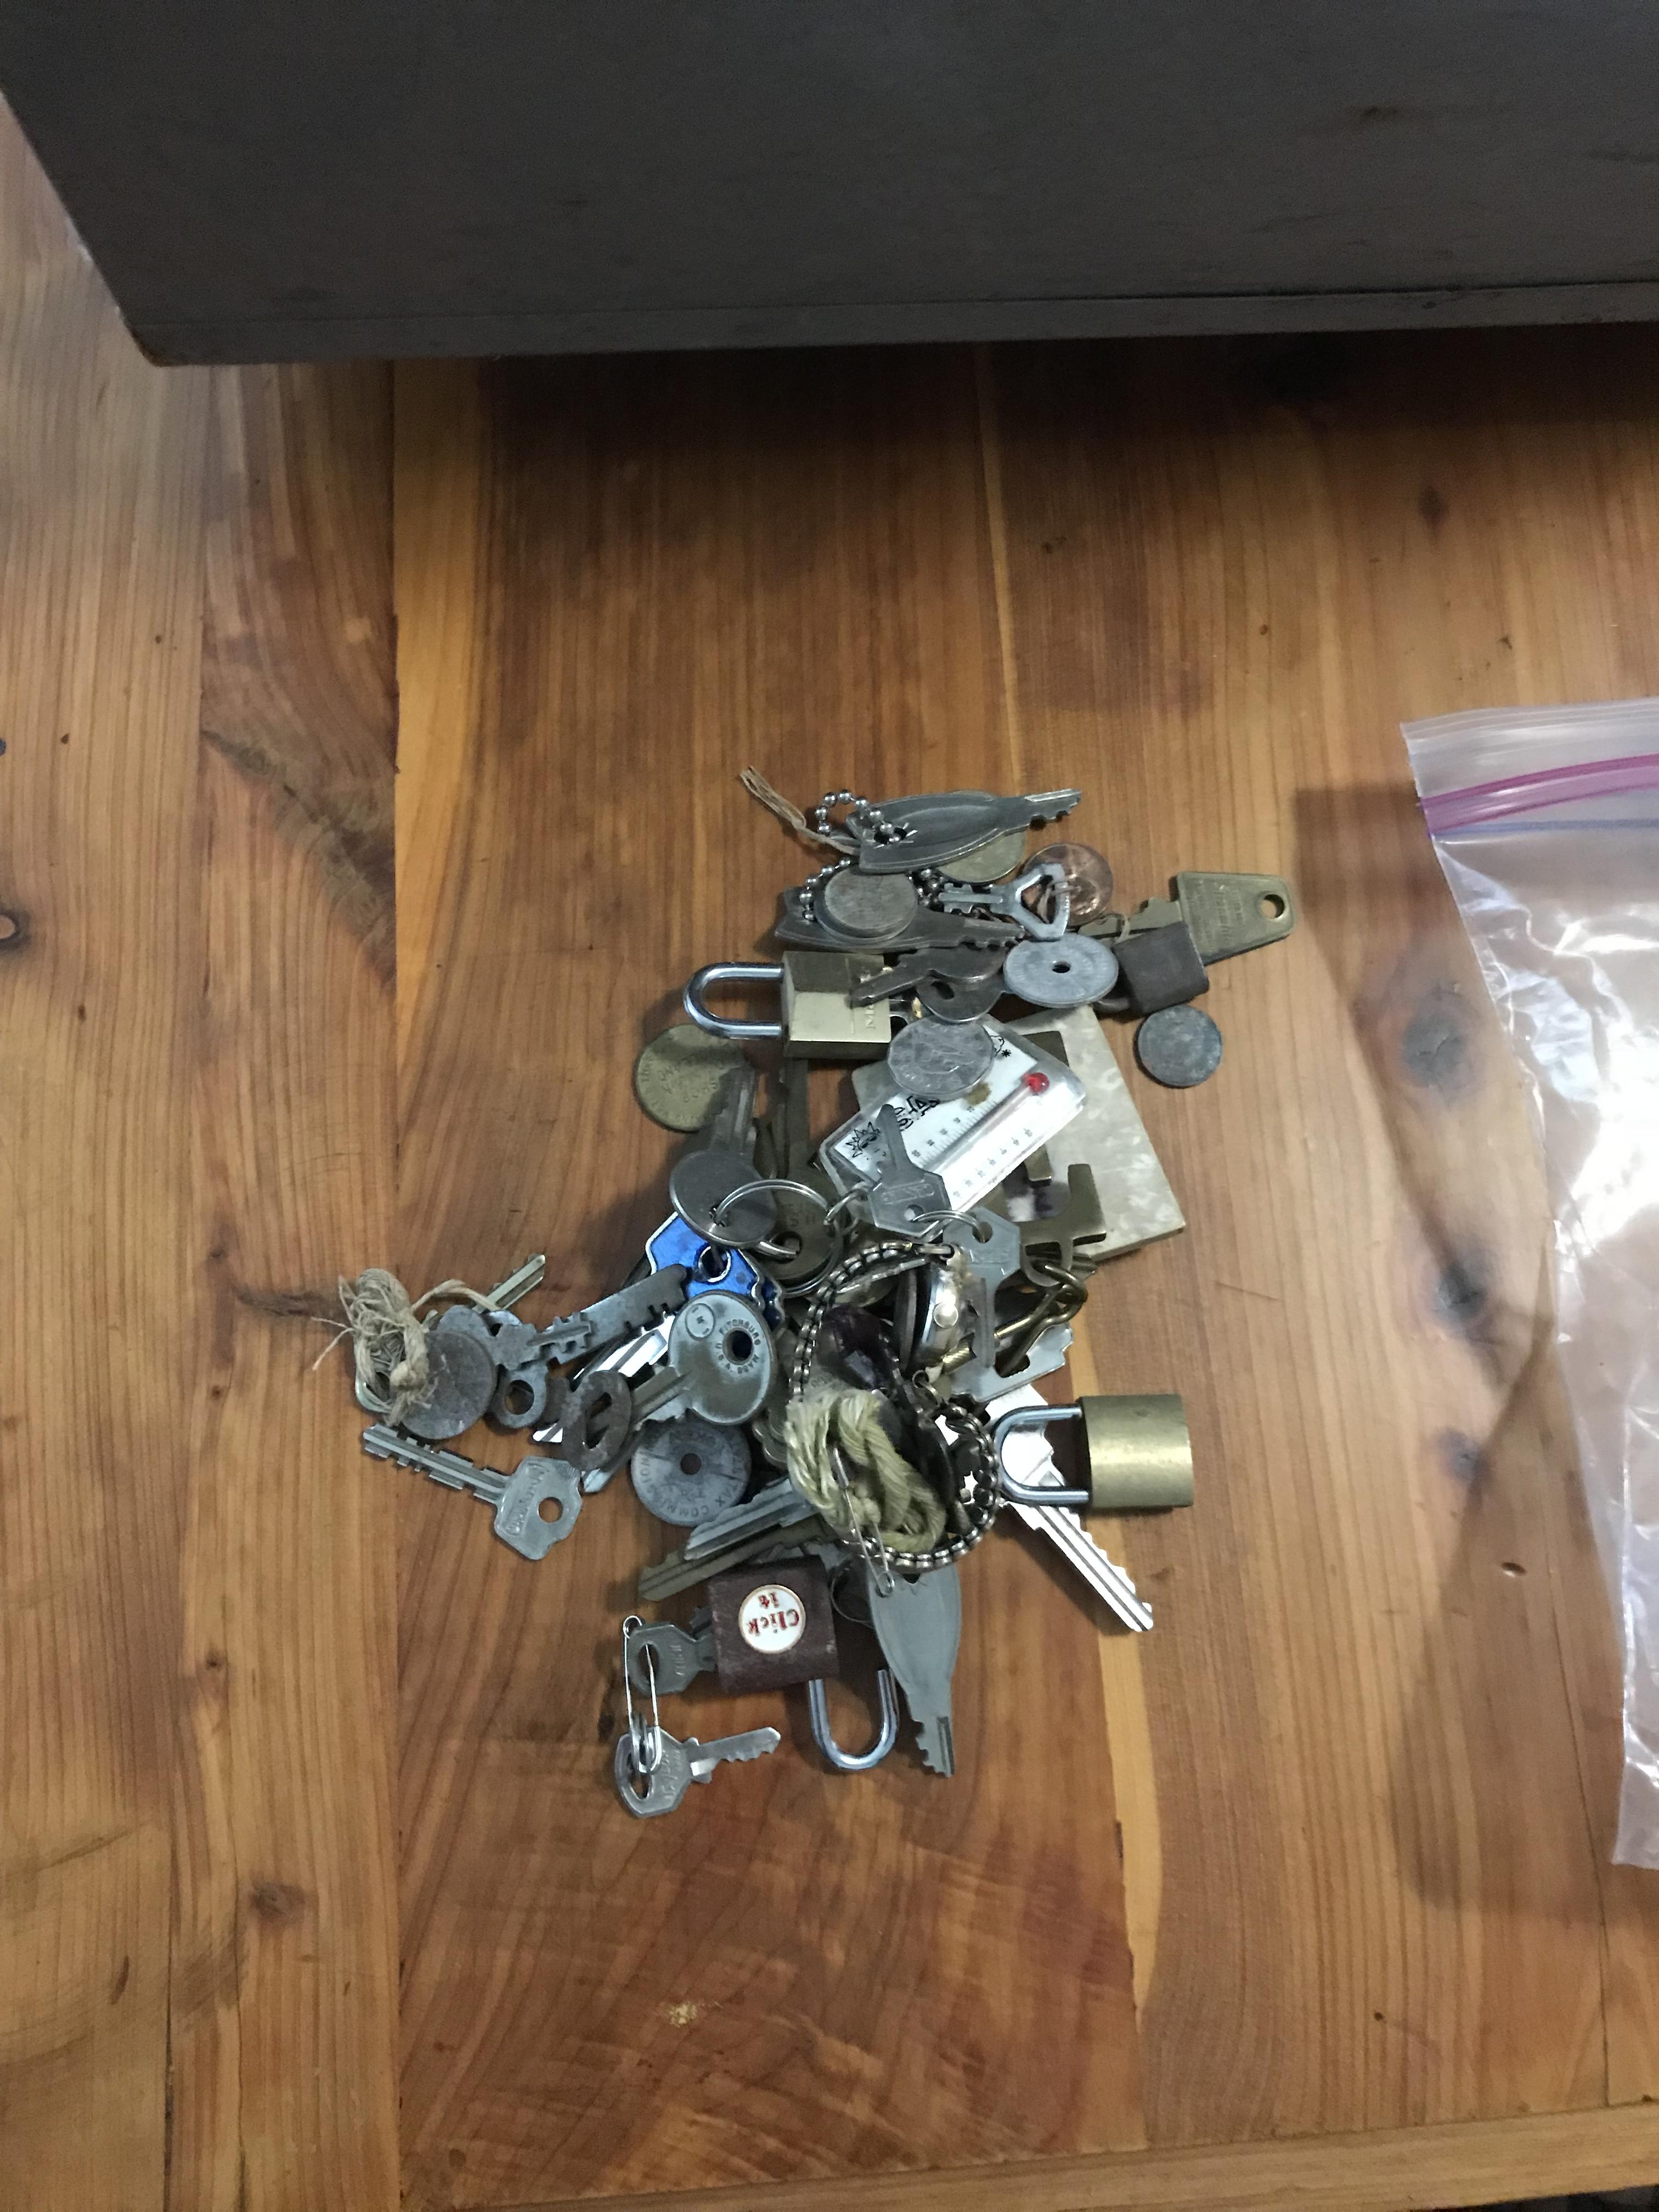 "Ok. Bag of keys in a drawer. One of these has to fit."